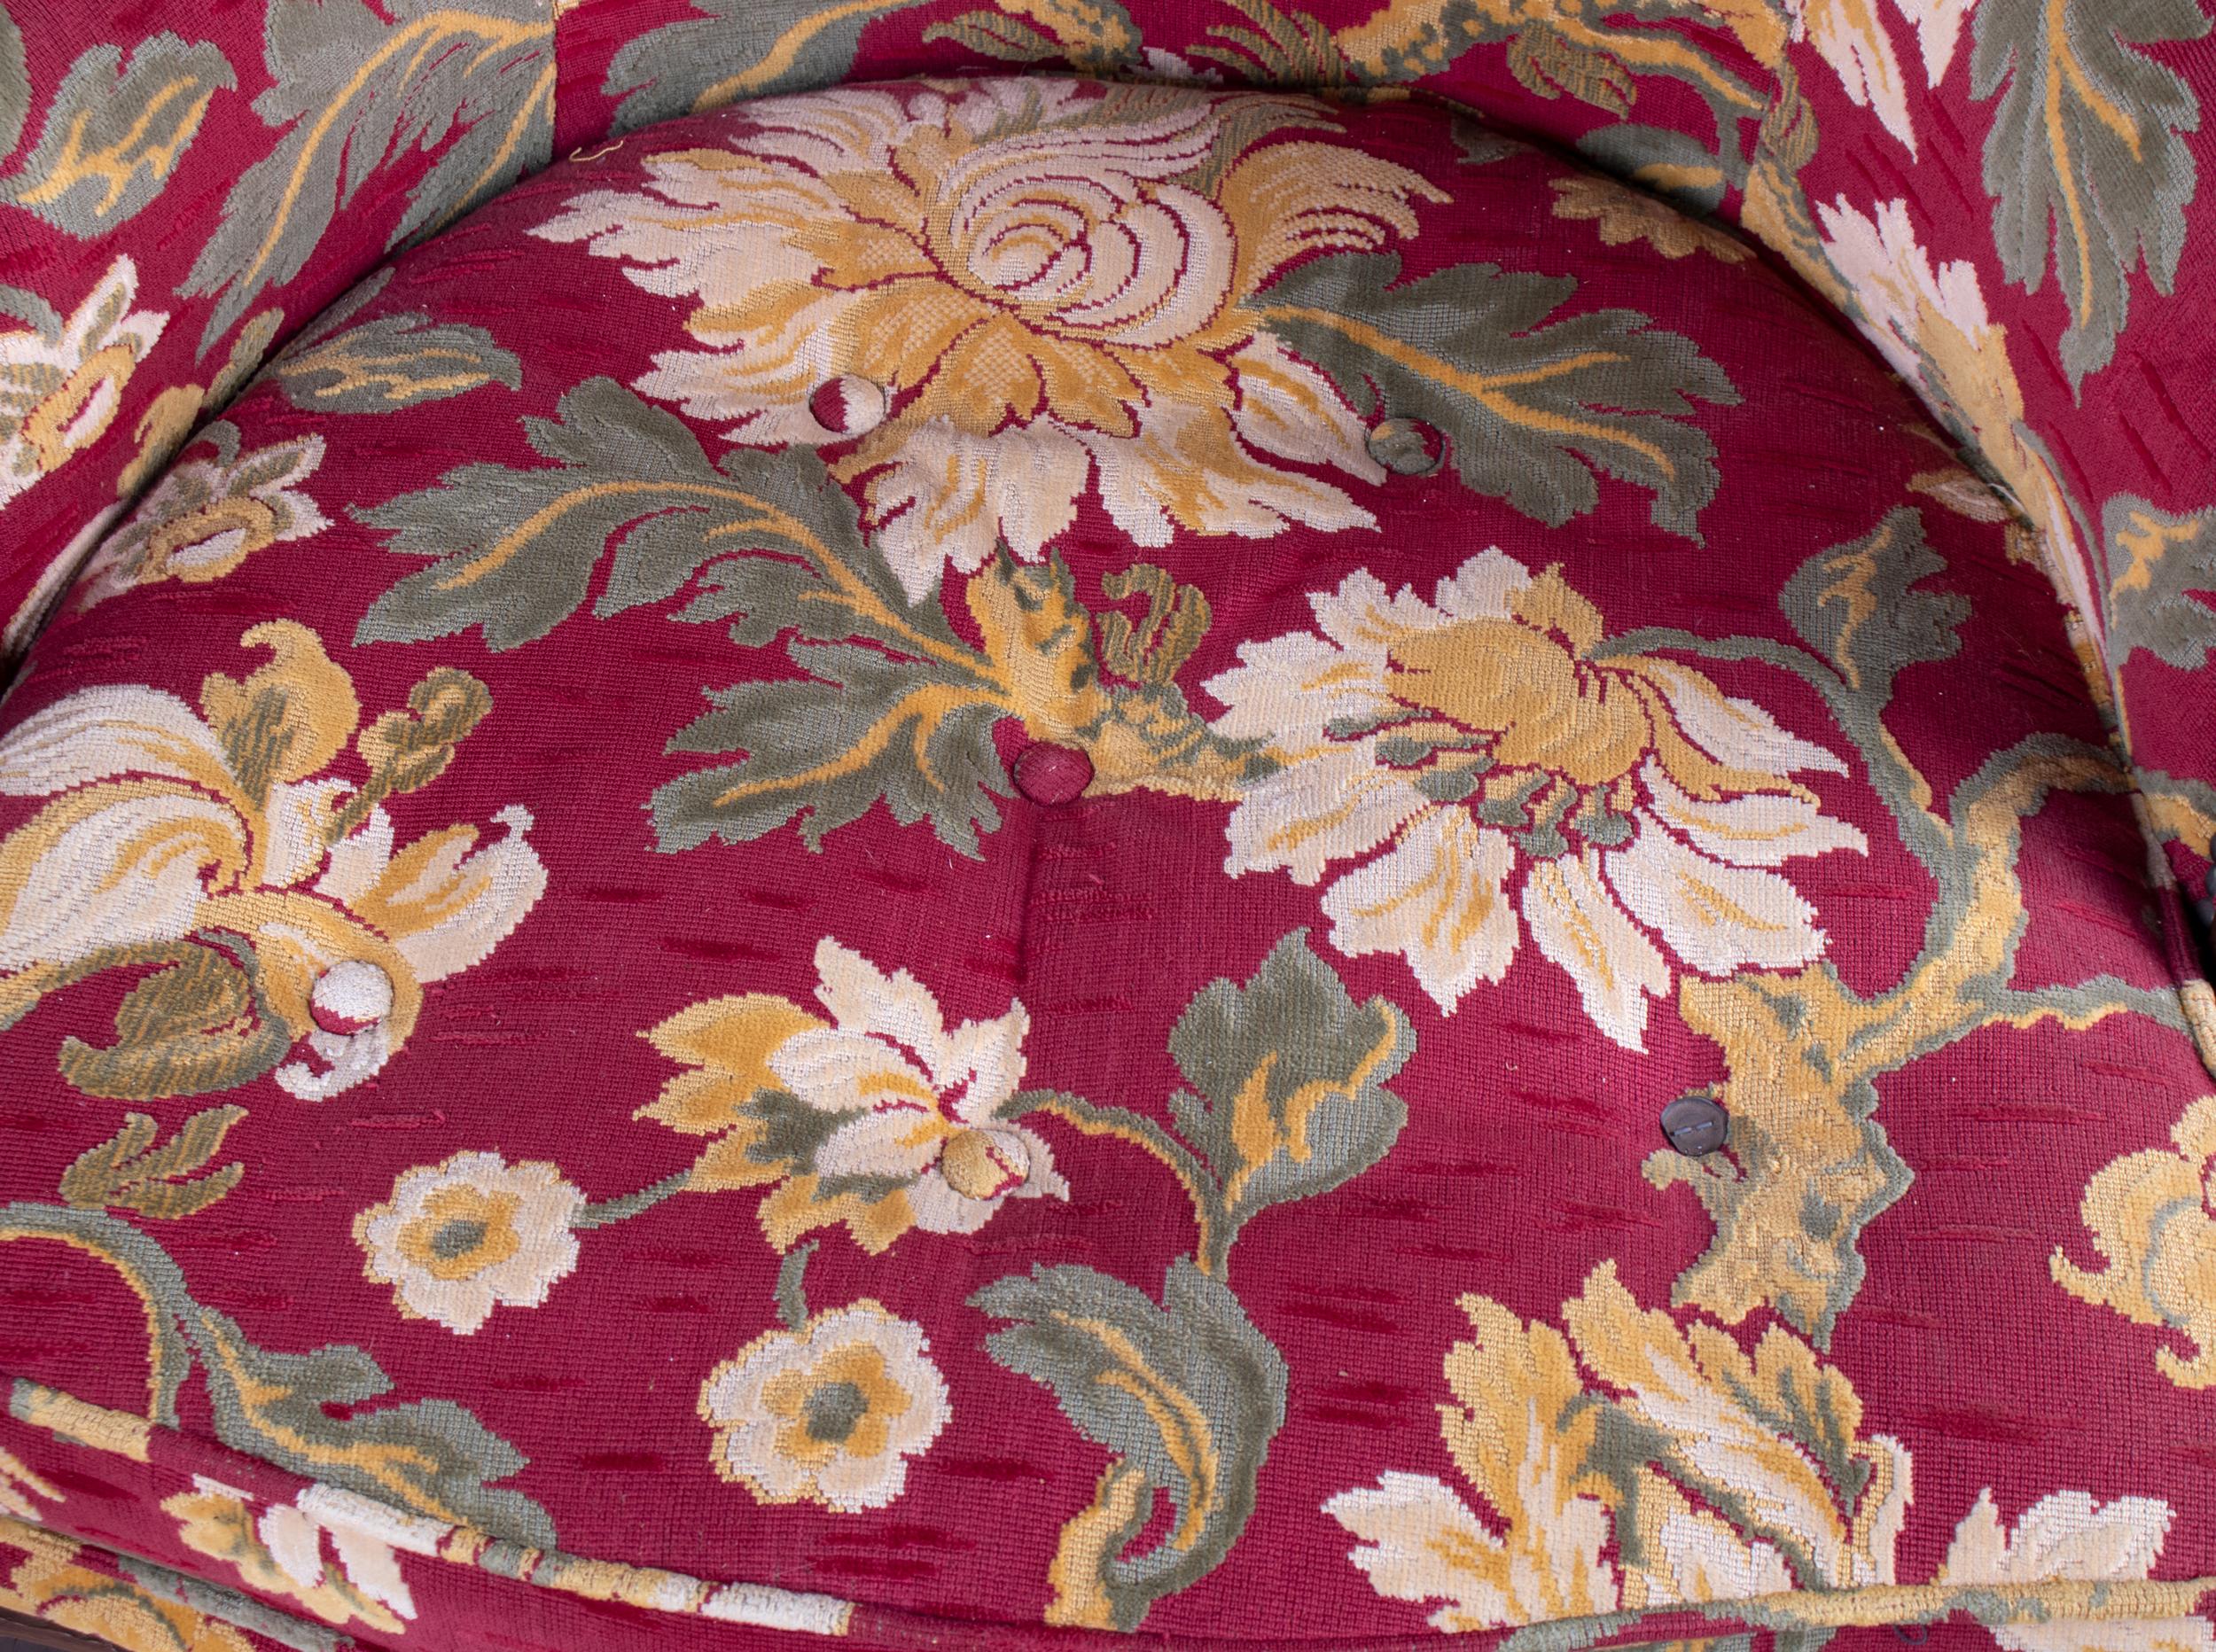 19th Century Pair of French Floral Upholstered Chairs For Sale 1